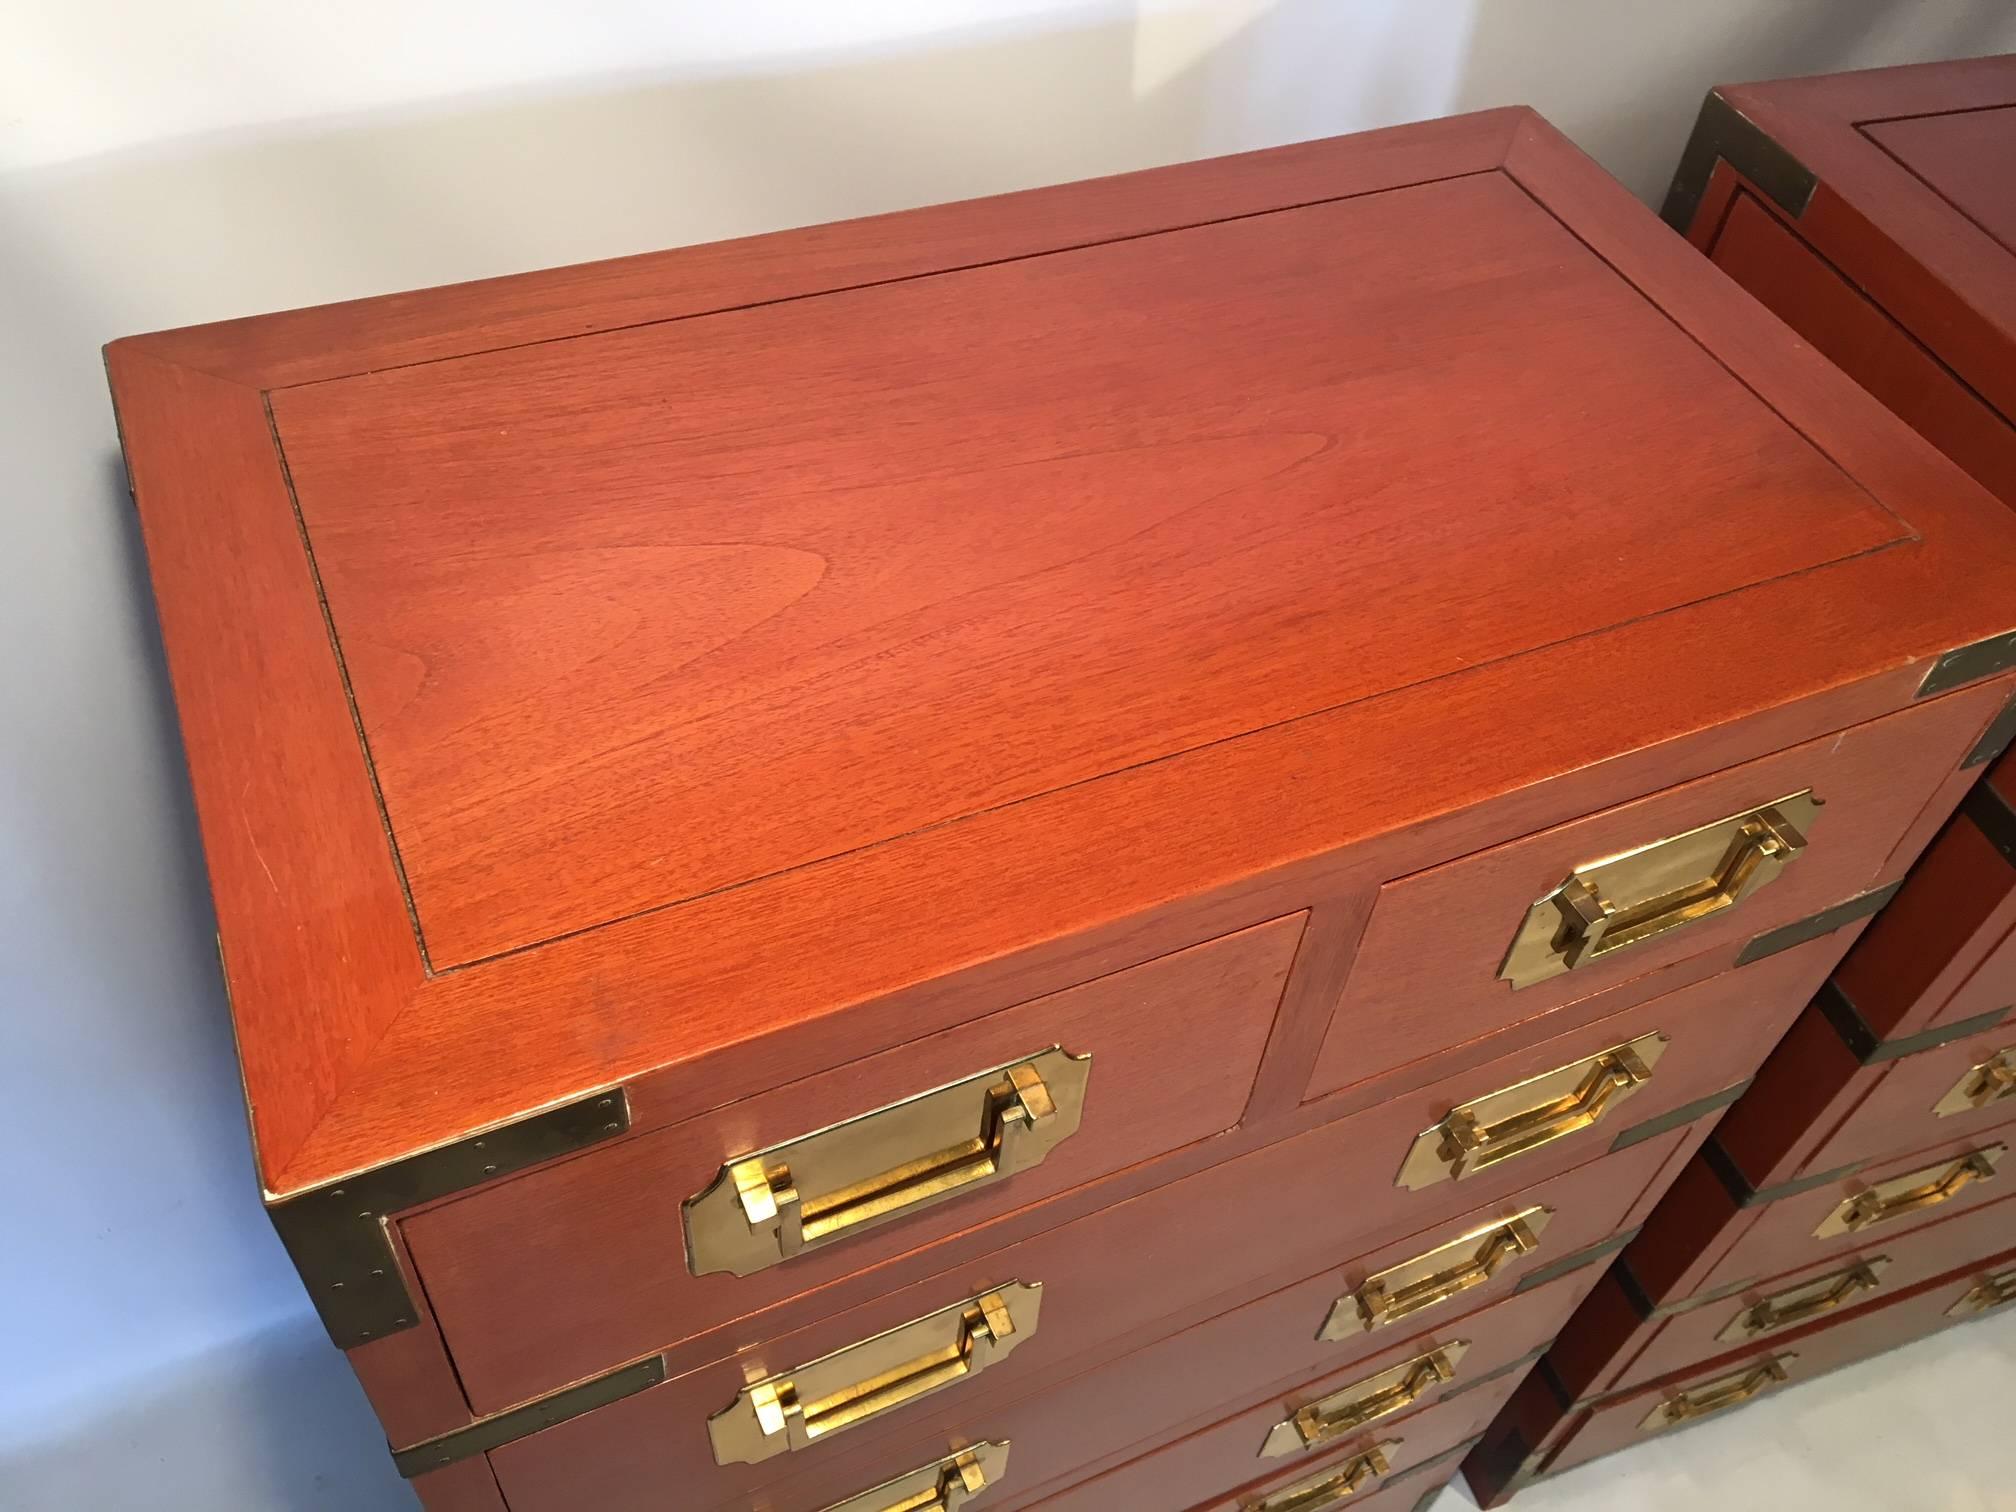 Pair of rosewood campaign dressers by George Zee & Company. Each chest complimented by brass pulls and generous corner hardware.